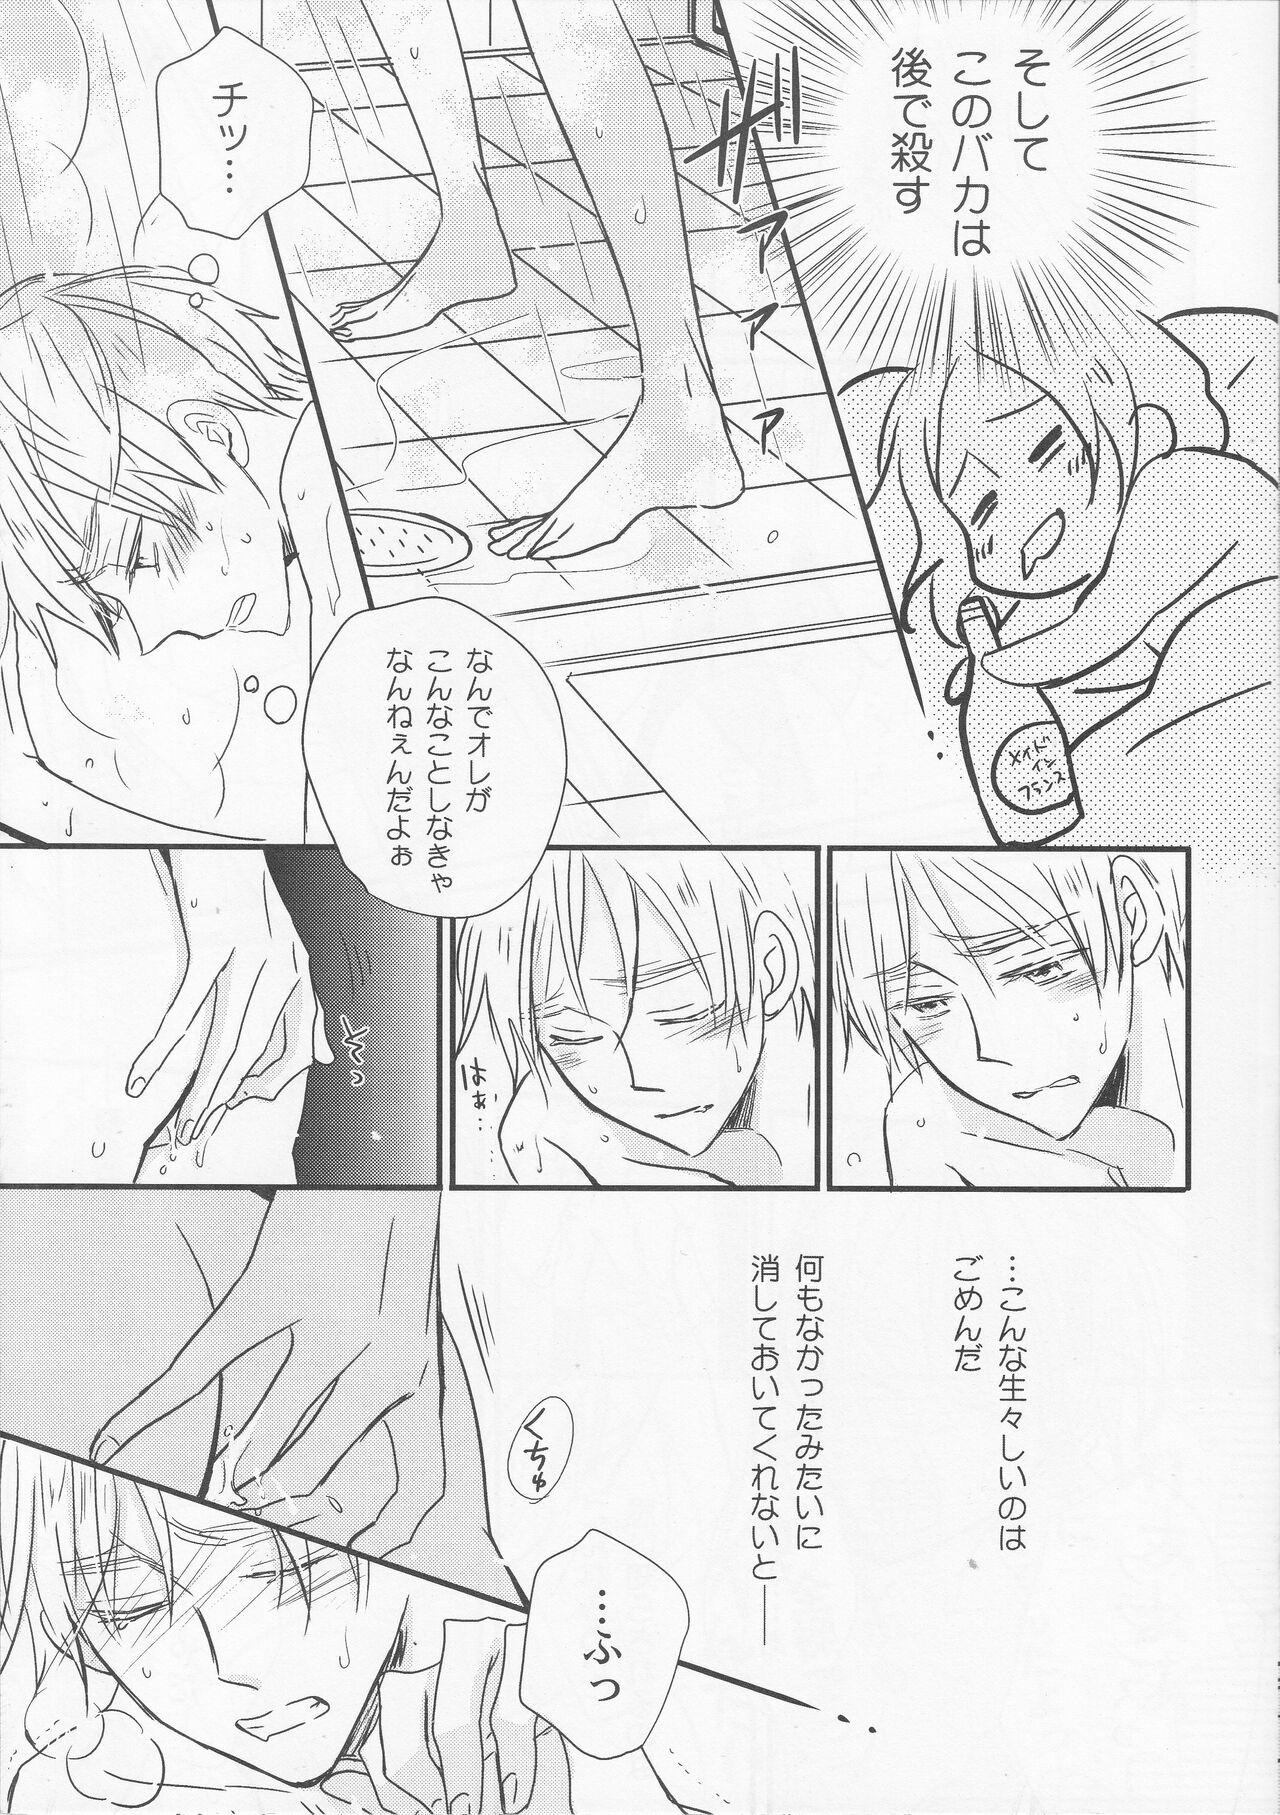 Gay unknown title - Axis powers hetalia Spanish - Page 6